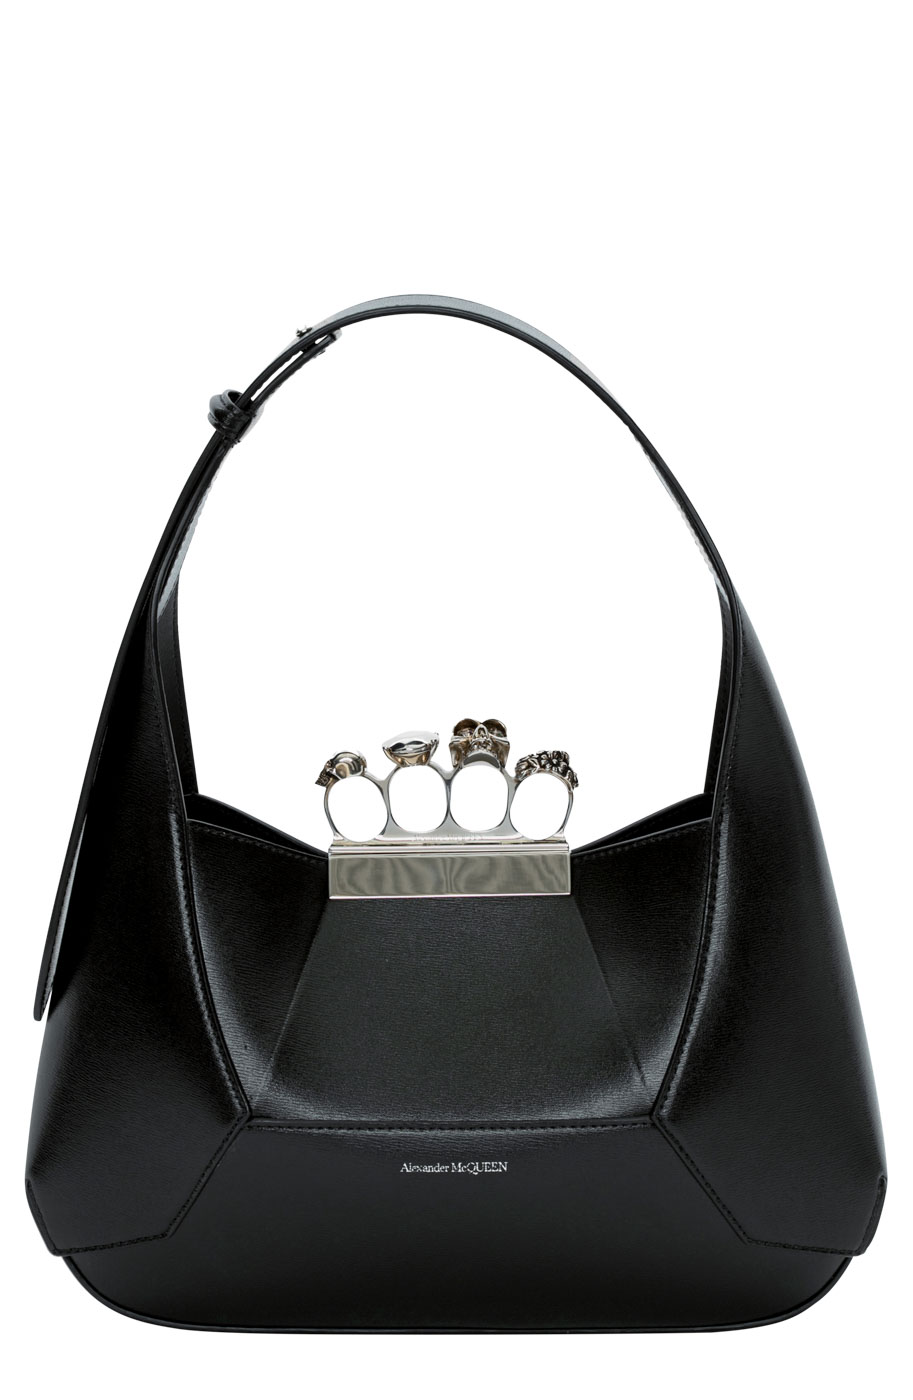 48 Sr2023 03 200 Alexander Mcqueen Jewelled Leather Hobo, Nordstrom Old Orchard, 847 677 2121